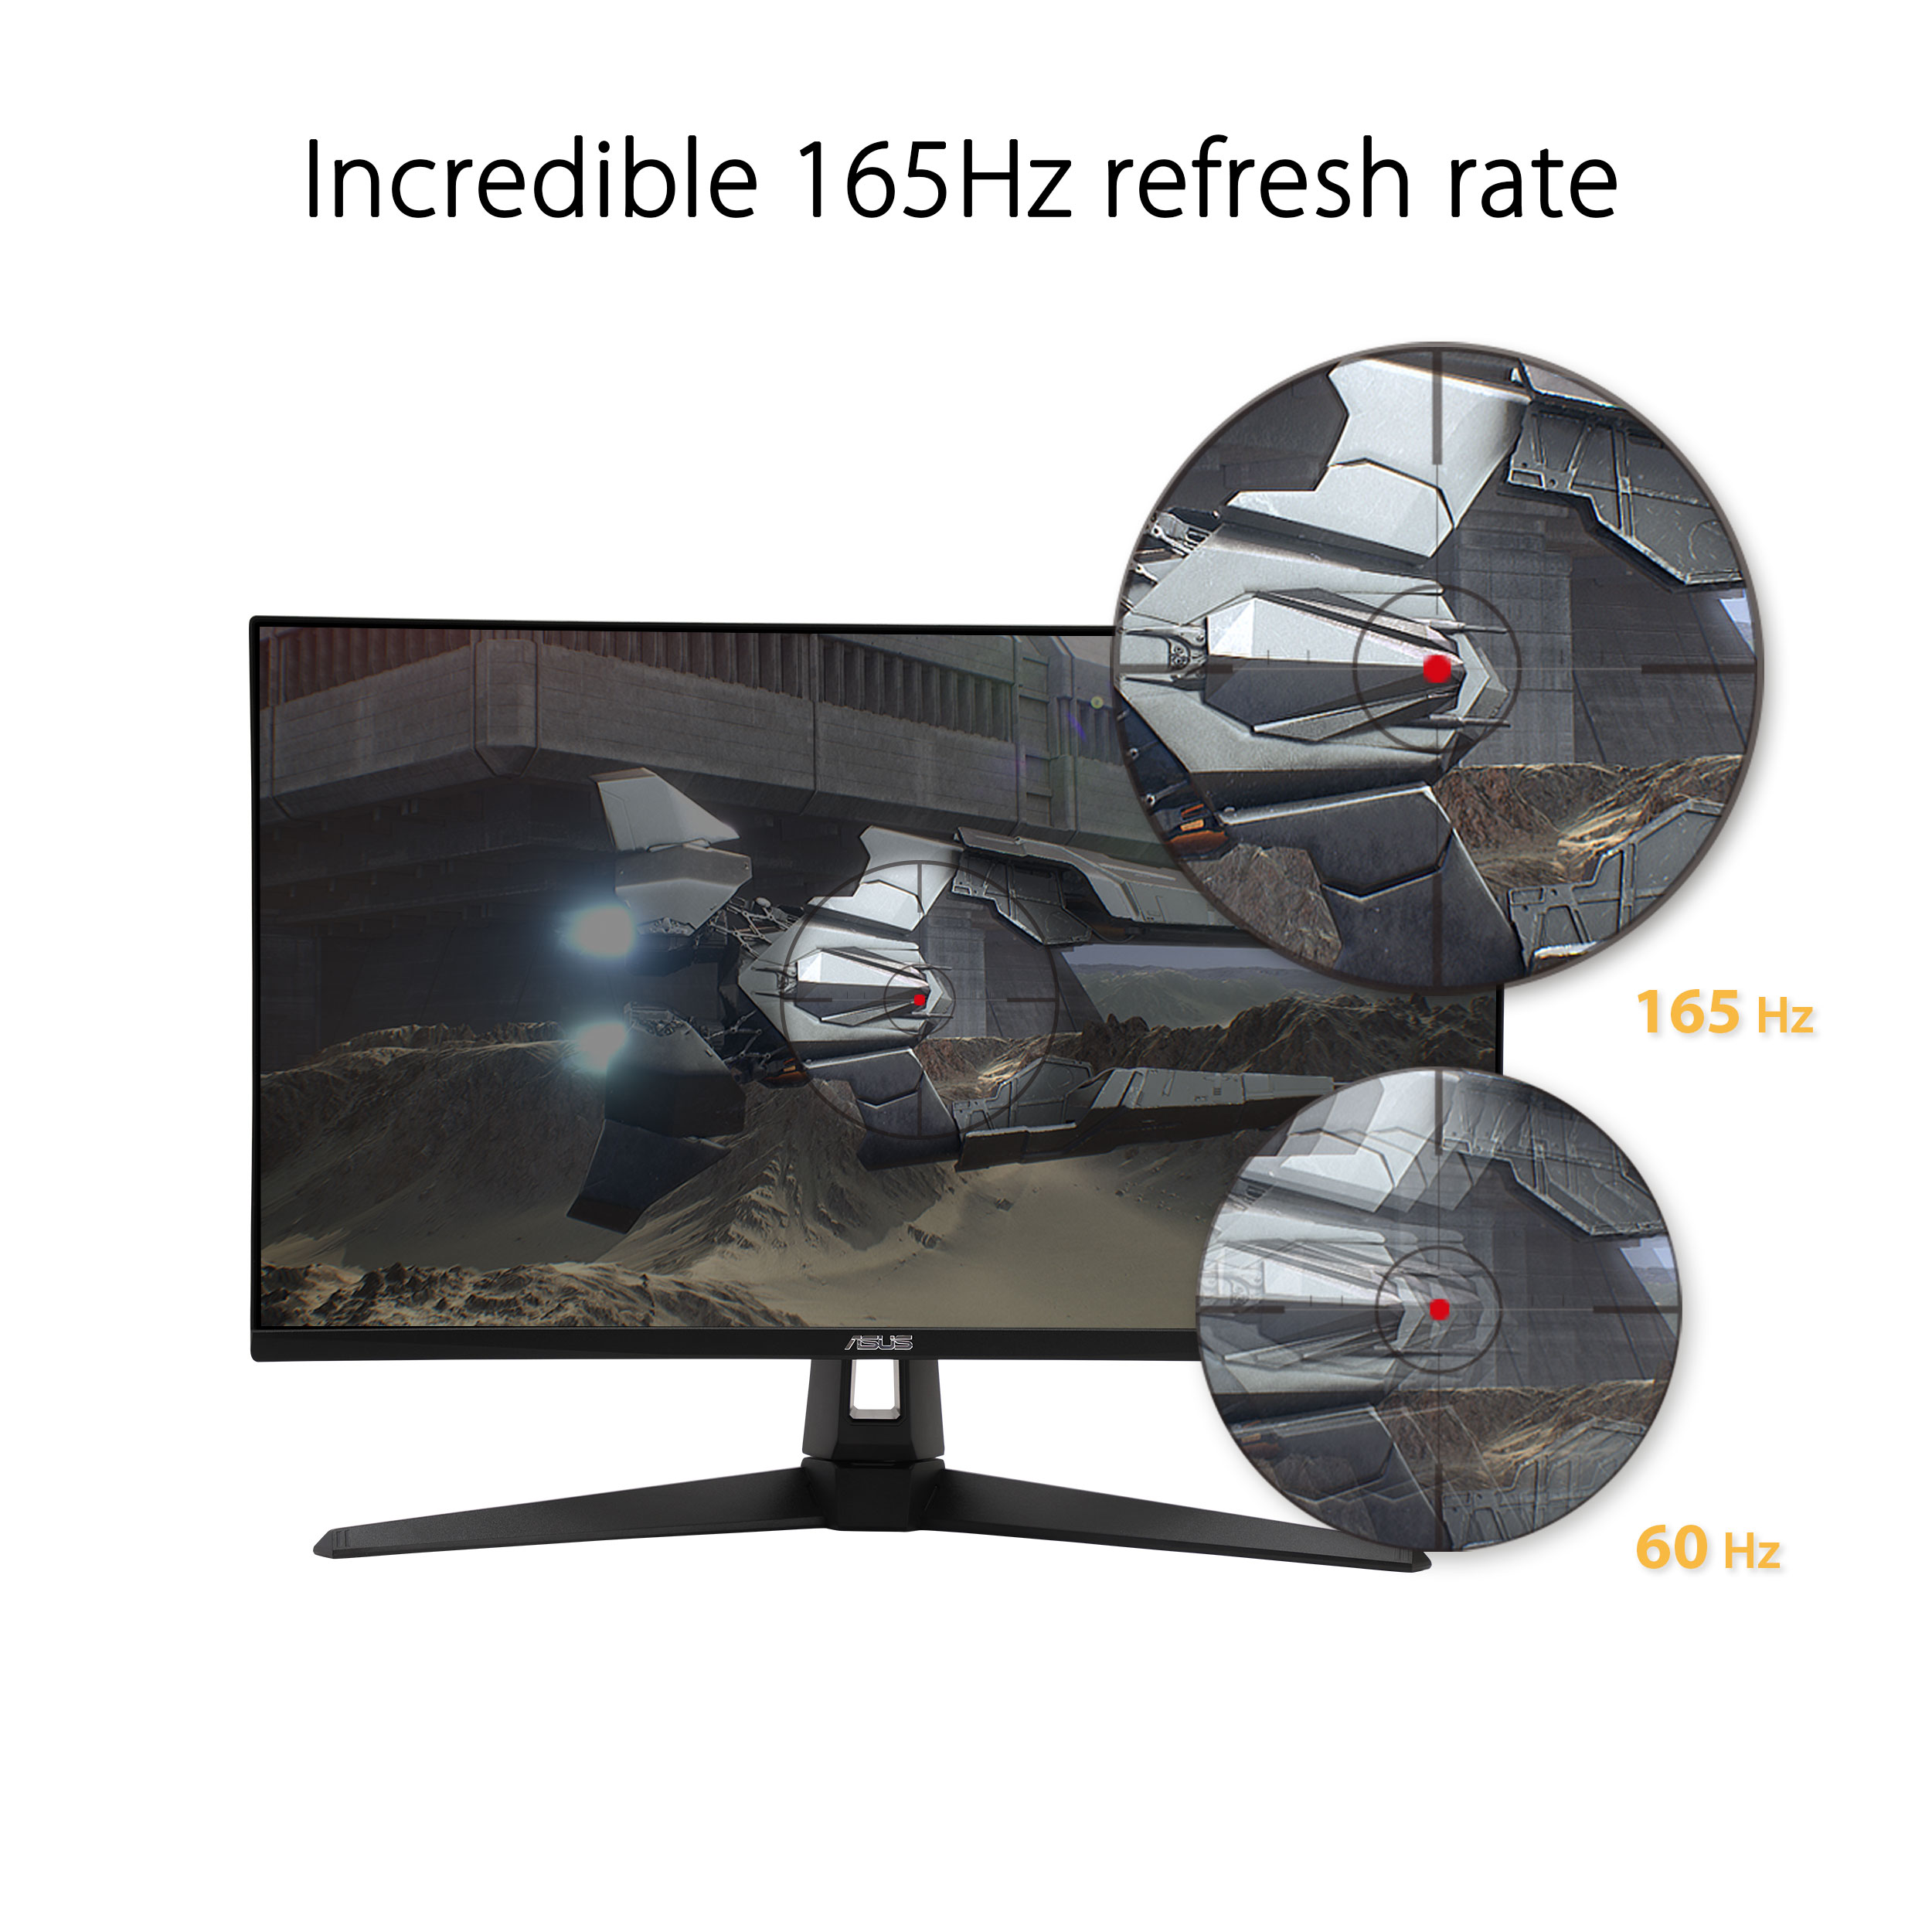 ASUS TUF Gaming 27” LED Gaming Monitor, 1080P Full HD, 165Hz (Supports 144Hz), IPS, 1ms - image 3 of 6